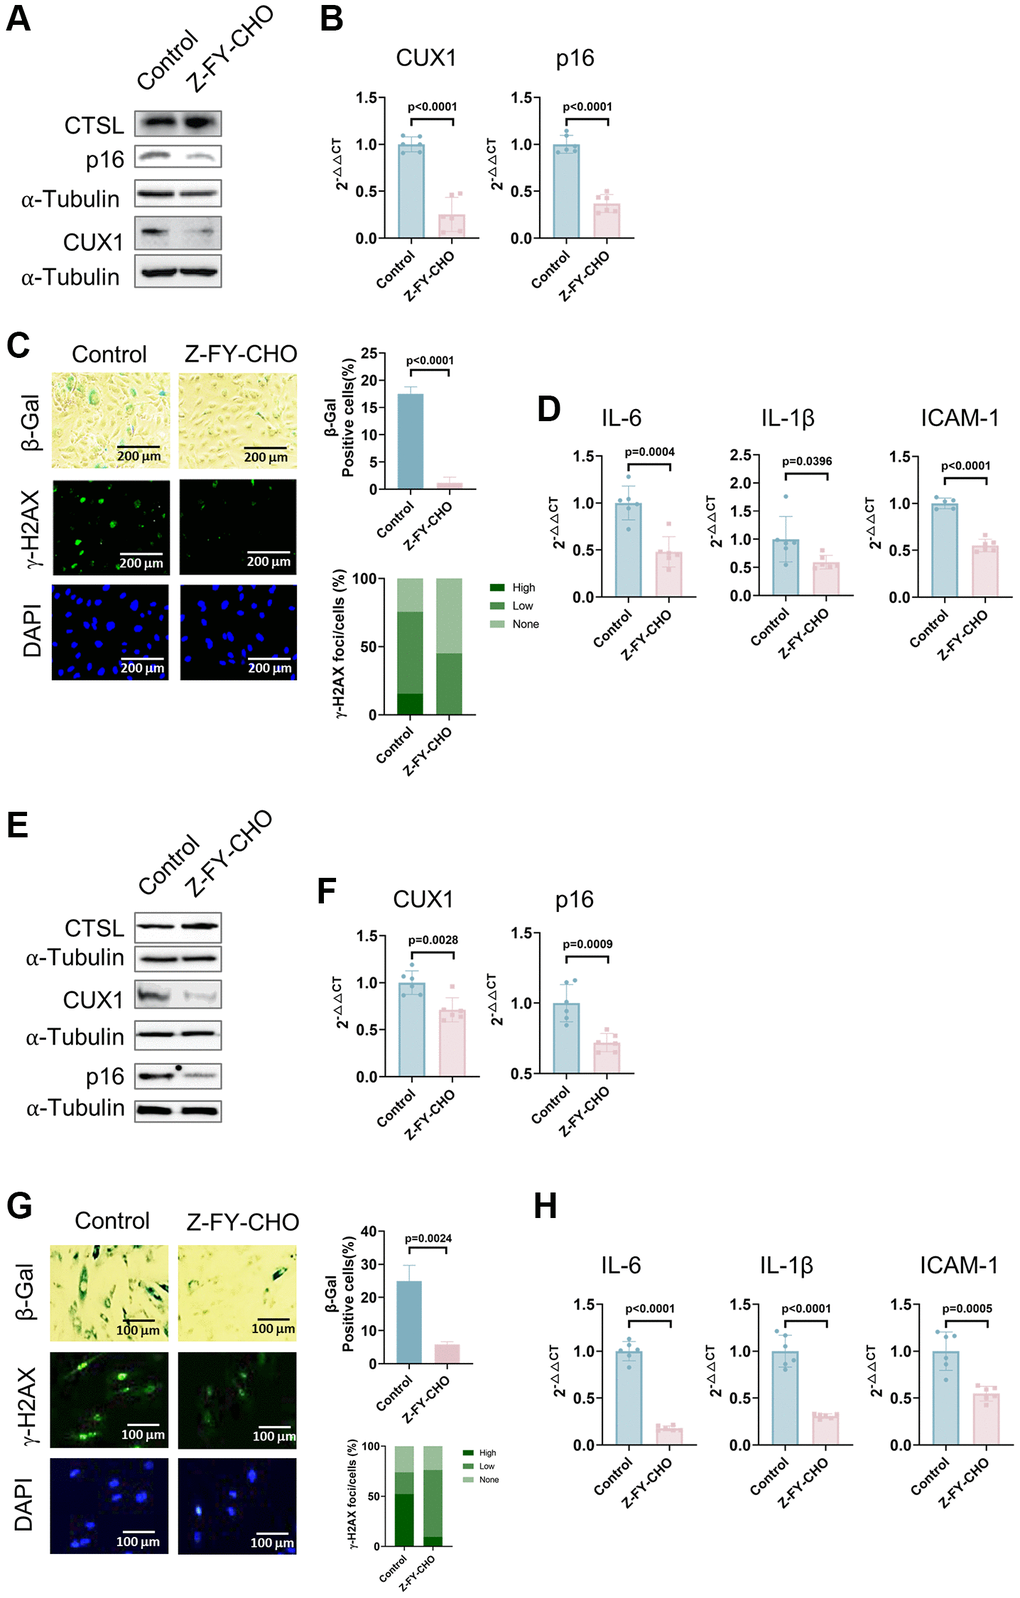 Inhibition of CTSL protease activity decreases the expression of CUX1 and p16INK4a, and inhibits cellular senescence in human ECs and VSMCs. (A, B) Western blot and qPCR analyses showing that inhibition of CTSL protease activity by Z-FY-CHO downregulates CUX1 and p16INK4a in human ECs. (C, D) inhibition of CTSL protease activity by Z-FY-CHO suppresses cellular senescence in human ECs as evidenced by SA-β-gal and γ-H2AX staining as well as by the expression of the SASP genes IL6, IL-1β, and ICAM-1. Quantitative plots for both β-gal+ cells (%) in SA-β-gal staining and γ-H2AX foci/cells (%) with γ-H2AX staining were shown on the right side of the panel C. DAPI staining visualizes the presence of nuclei as a control for the cells in this analysis. (E, F) Western blot and qPCR analyses showing that inhibition of CTSL protease activity by Z-FY-CHO downregulates CUX1 and p16INK4a in human VSMCs. (G, H) inhibition of CTSL protease activity by Z-FY-CHO suppresses cellular senescence in human VSMCs as evidenced by SA-β-gal and γ-H2AX staining as well as by the expression of the SASP genes IL6, IL-1β, and ICAM-1. Quantitative plots for both β-gal+ cells (%) in SA-β-gal staining and γ-H2AX foci/cells (%) with γ-H2AX staining were shown on the right side of the panel G. DAPI staining visualizes the presence of nuclei as a control for the cells in this analysis. Data for Western blots represent three biologically independent samples (n = 3). Data for qPCR represent a combination of three (n = 3) biologically independent experiments. Data for both SA-β-gal staining and γ-H2AX staining represent three biologically independent samples (n = 3).